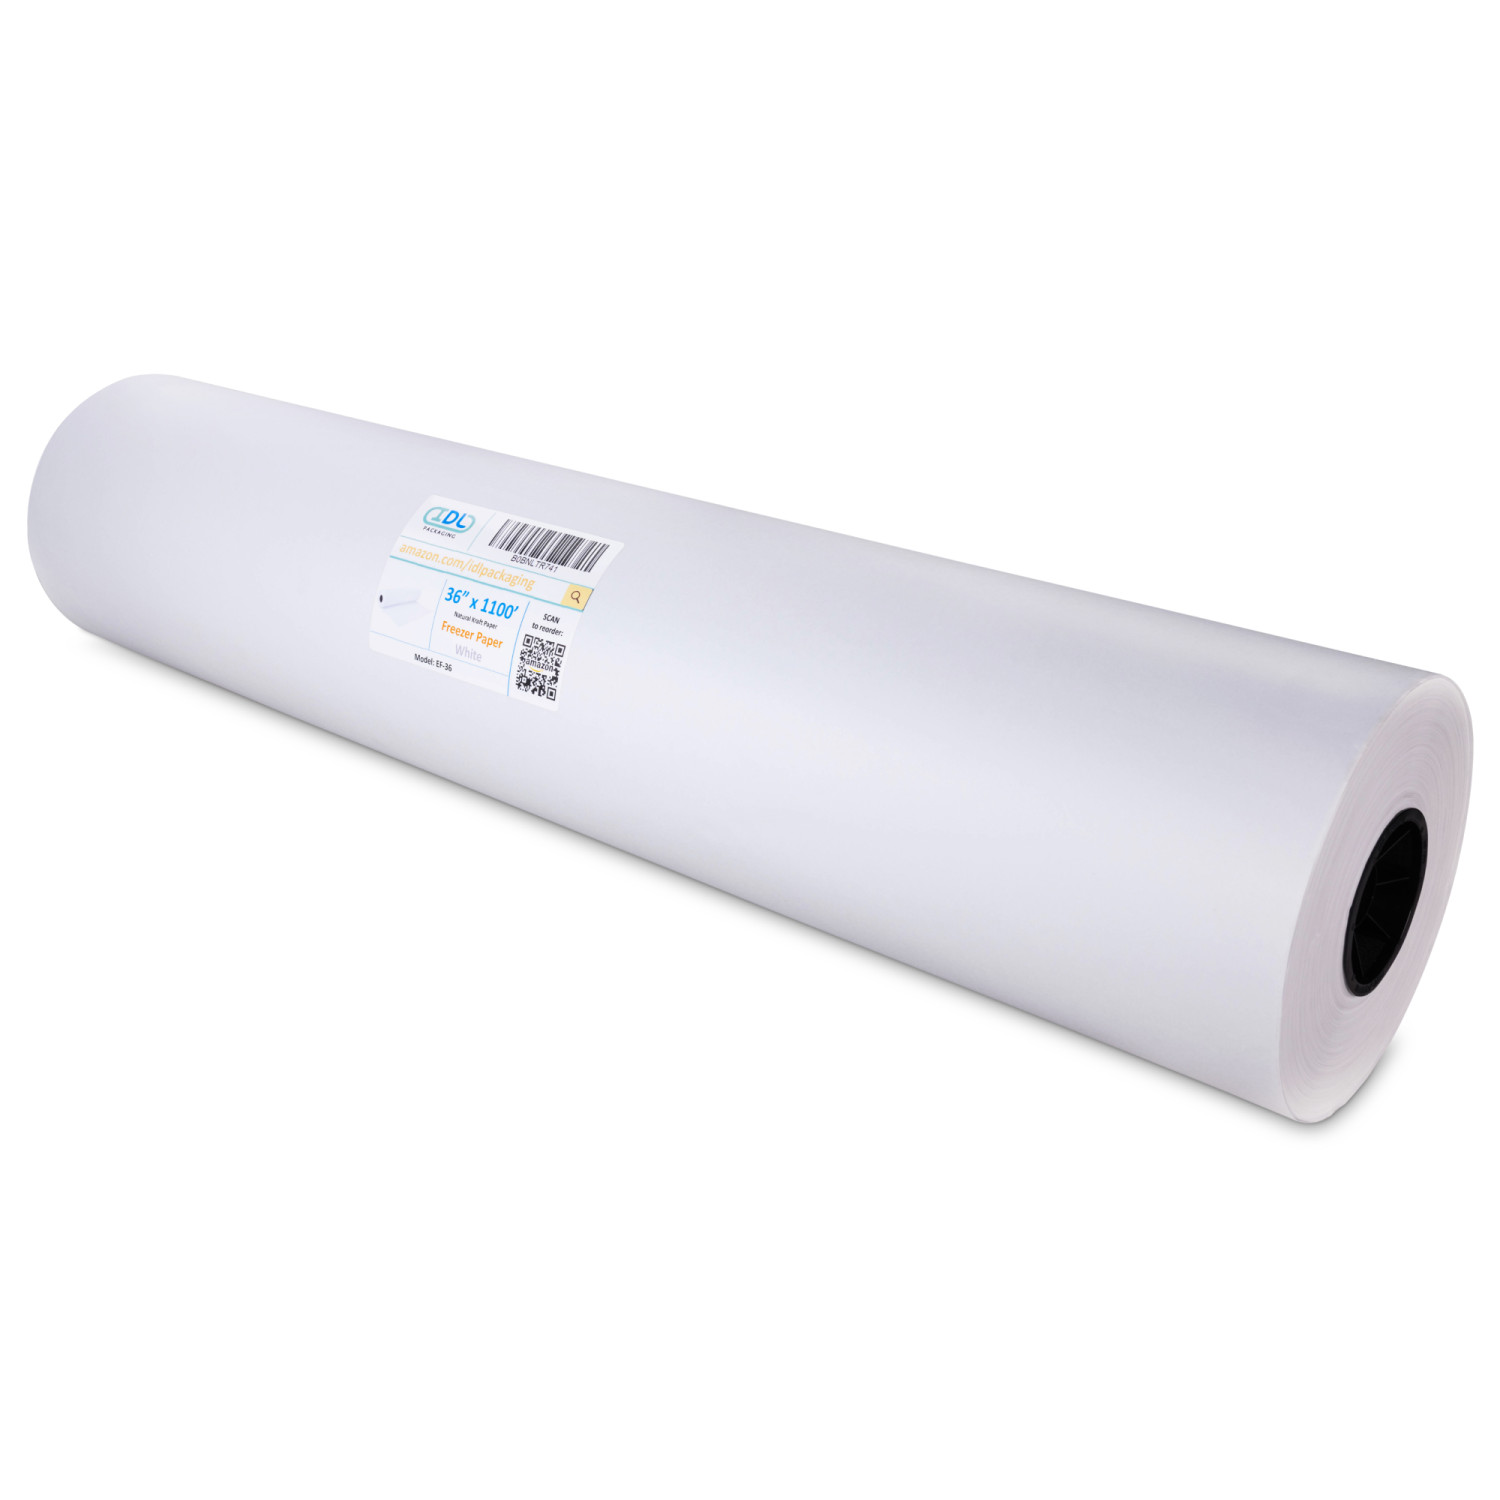 36 x 1100' Freezer Paper Roll for Meat and Fish, White buy in stock in  U.S. in IDL Packaging